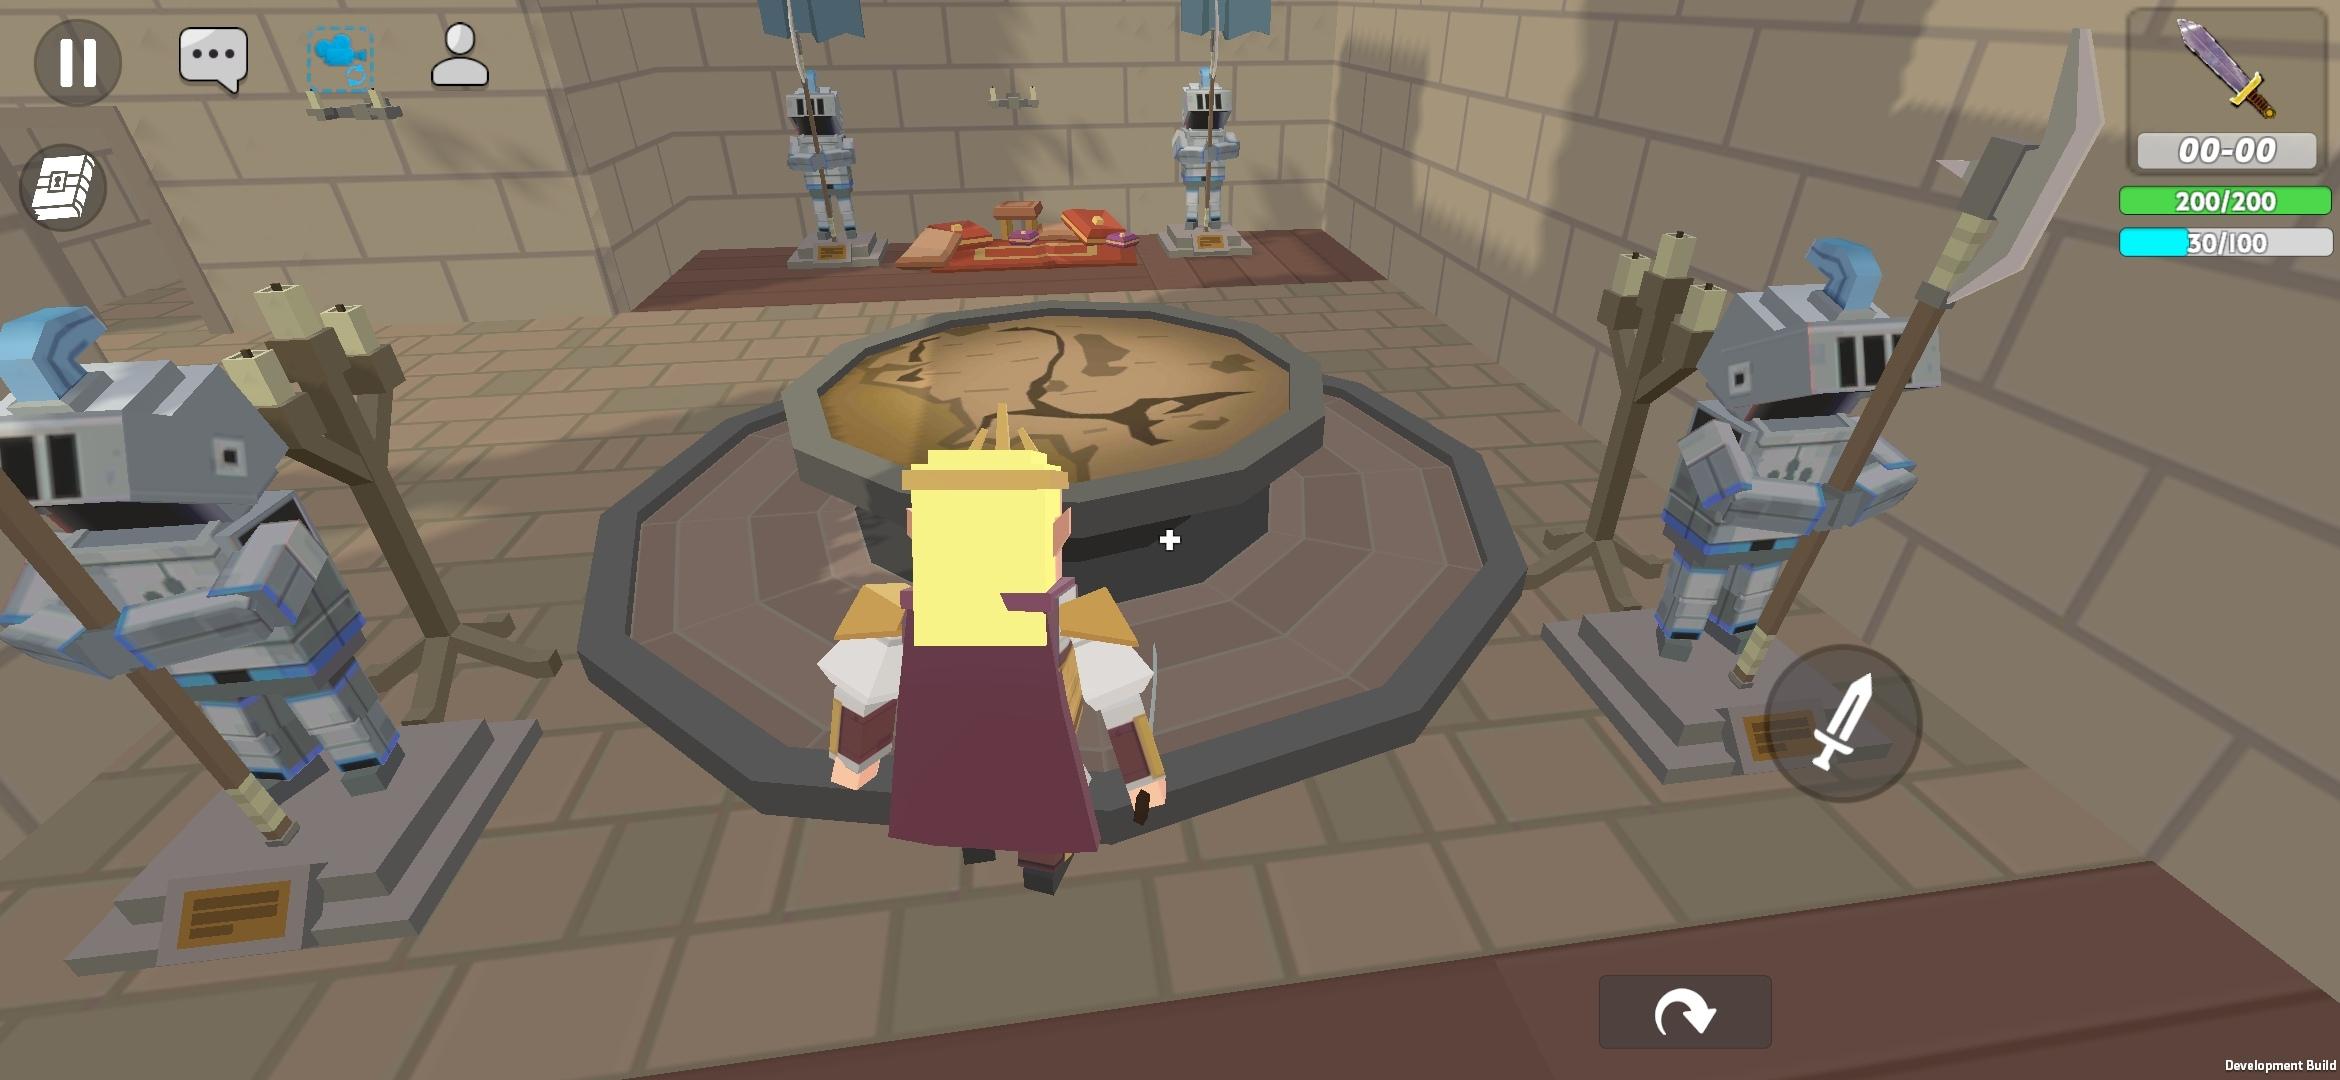 Simple Sandbox 2 Middle Ages For Android Apk Download 💯 best free construction sandbox game. simple sandbox 2 middle ages for